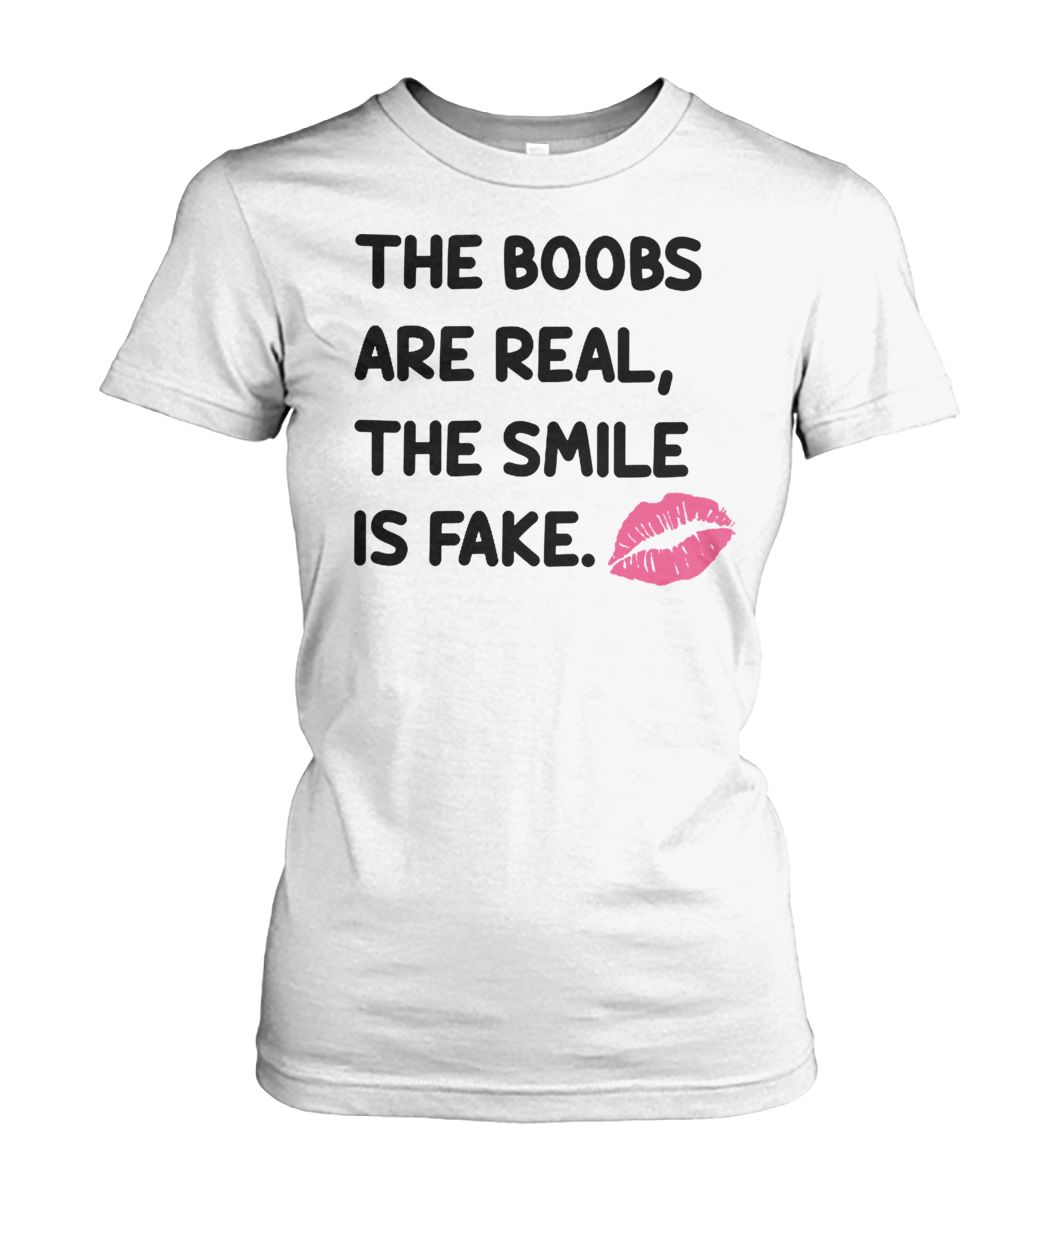 The boobs are real the smile is fake women's crew tee